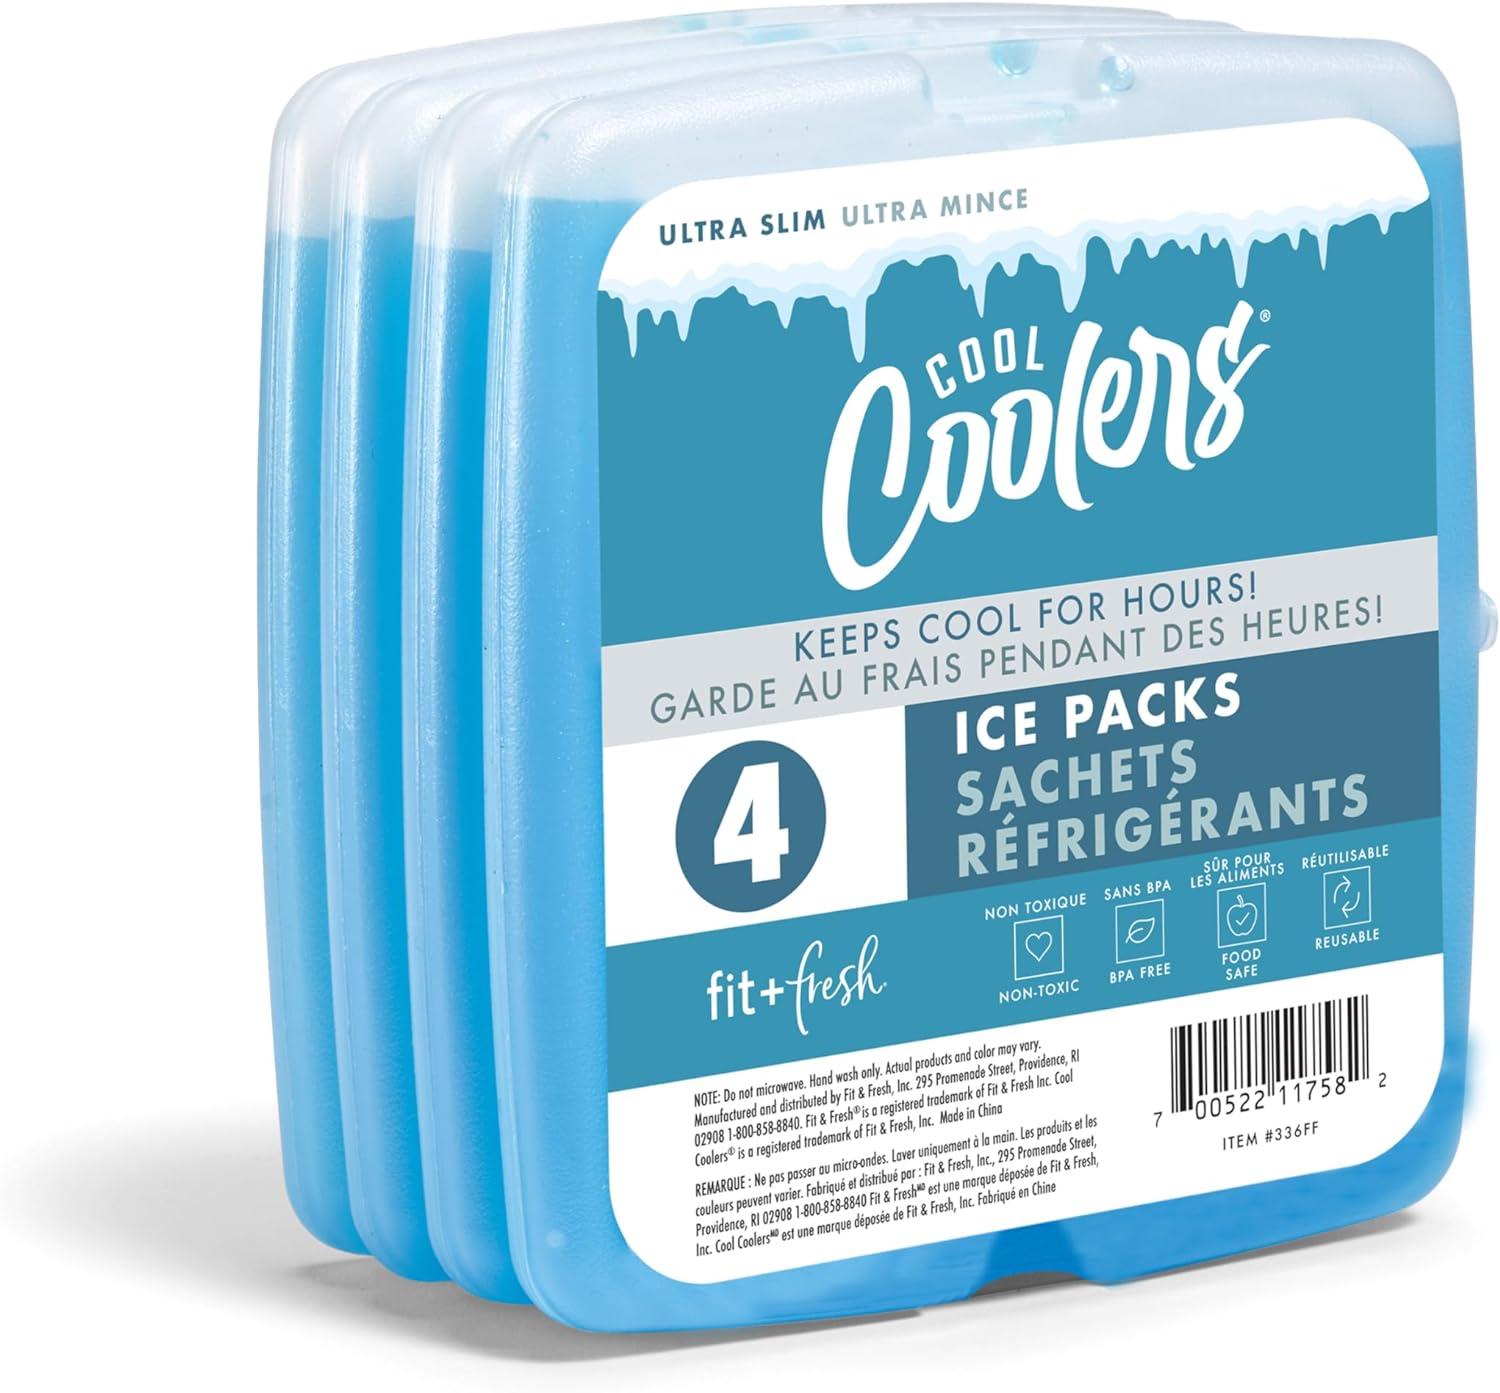 Cool Coolers Slim Ice Packs for Lunch Boxes or Coolers 4 Pack for $6